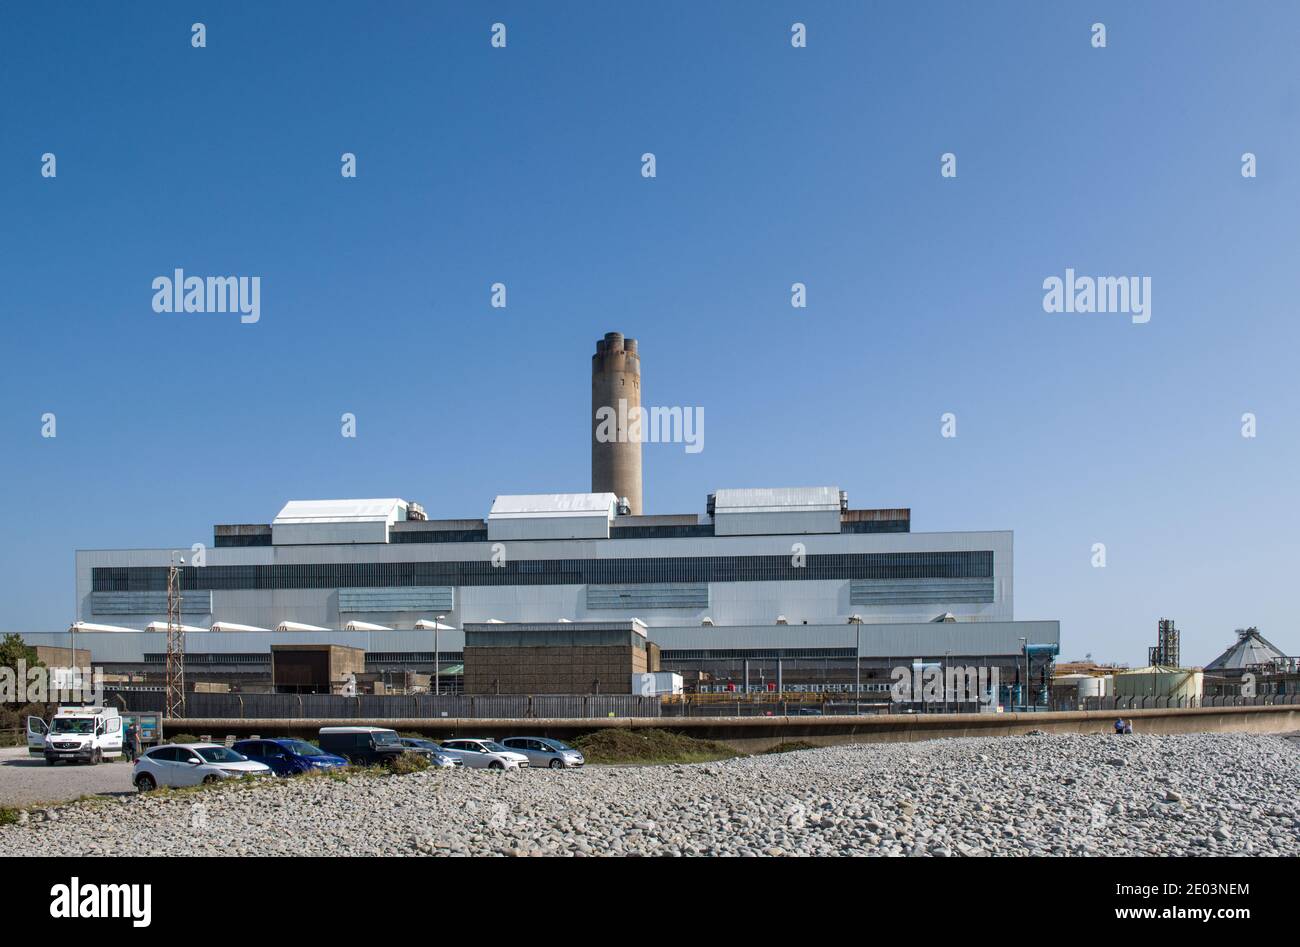 Aberthaw B Power Station at Aberthaw, decommissioned in March 2020.  The Power Station, coal fired, is on the Glamorgan Heritage Coast, south Wales Stock Photo